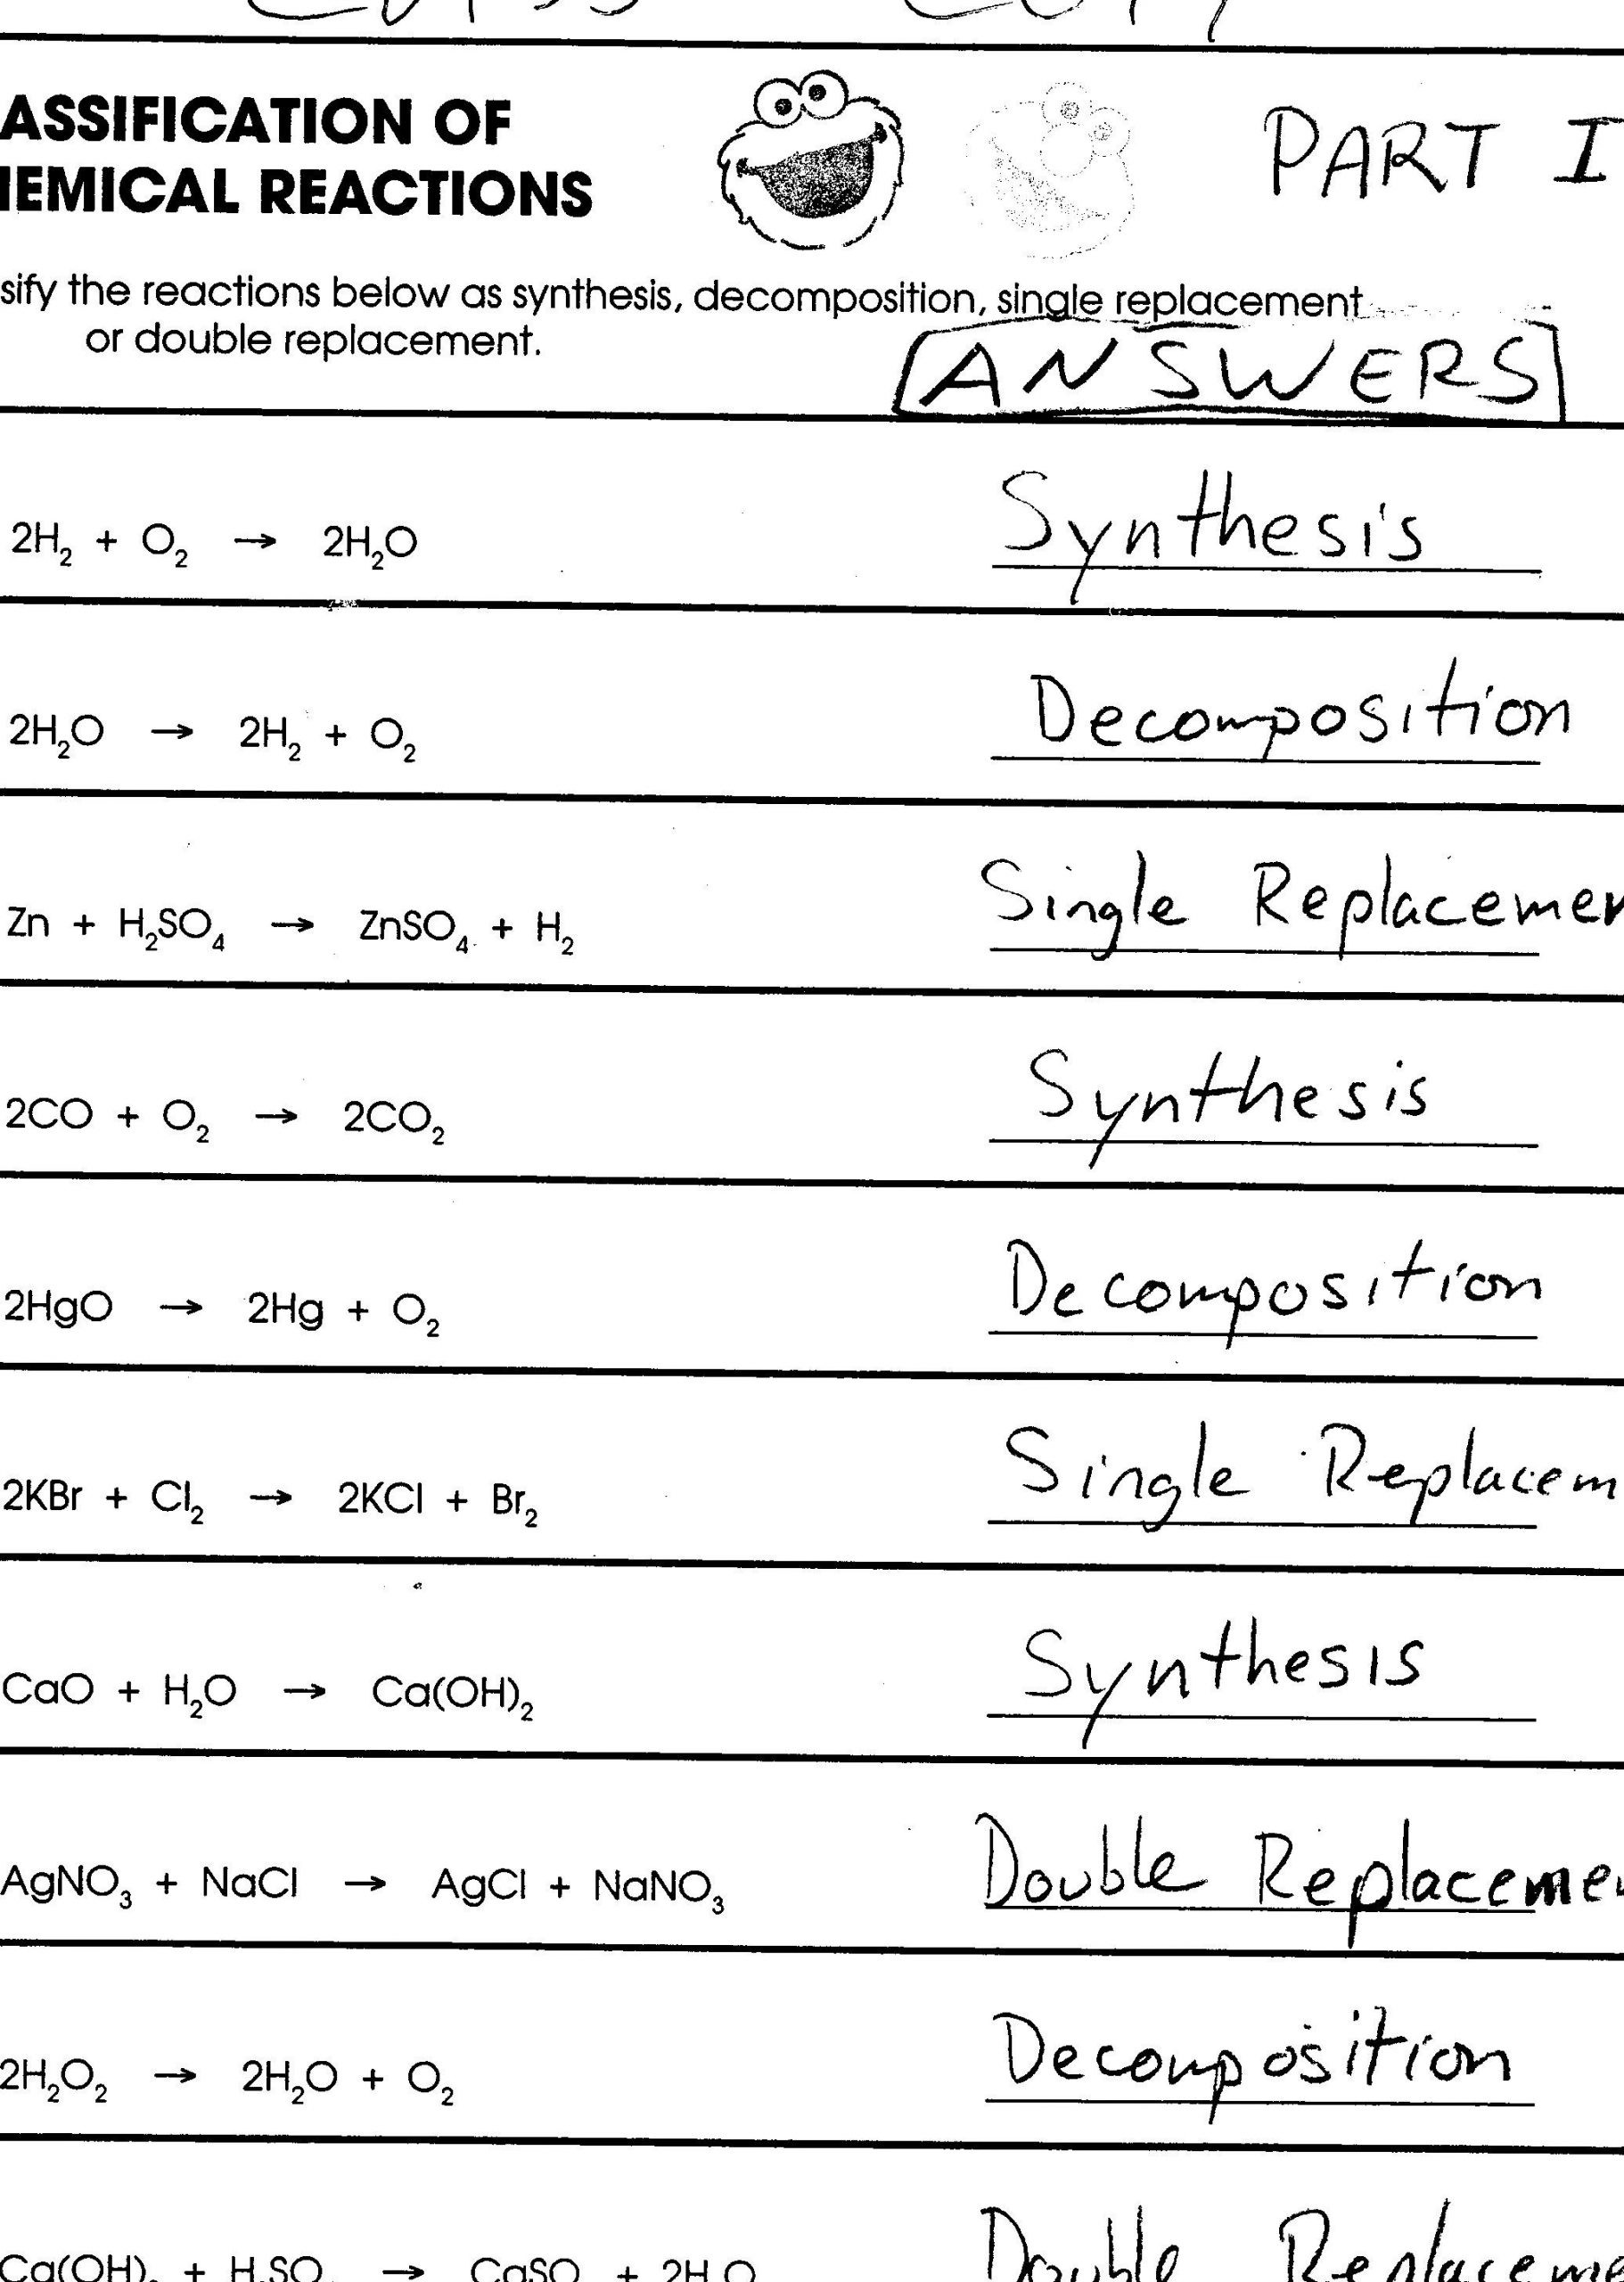 Chemical Reactions Types Worksheet 10 Classifying Chemical Reactions Worksheet Answers